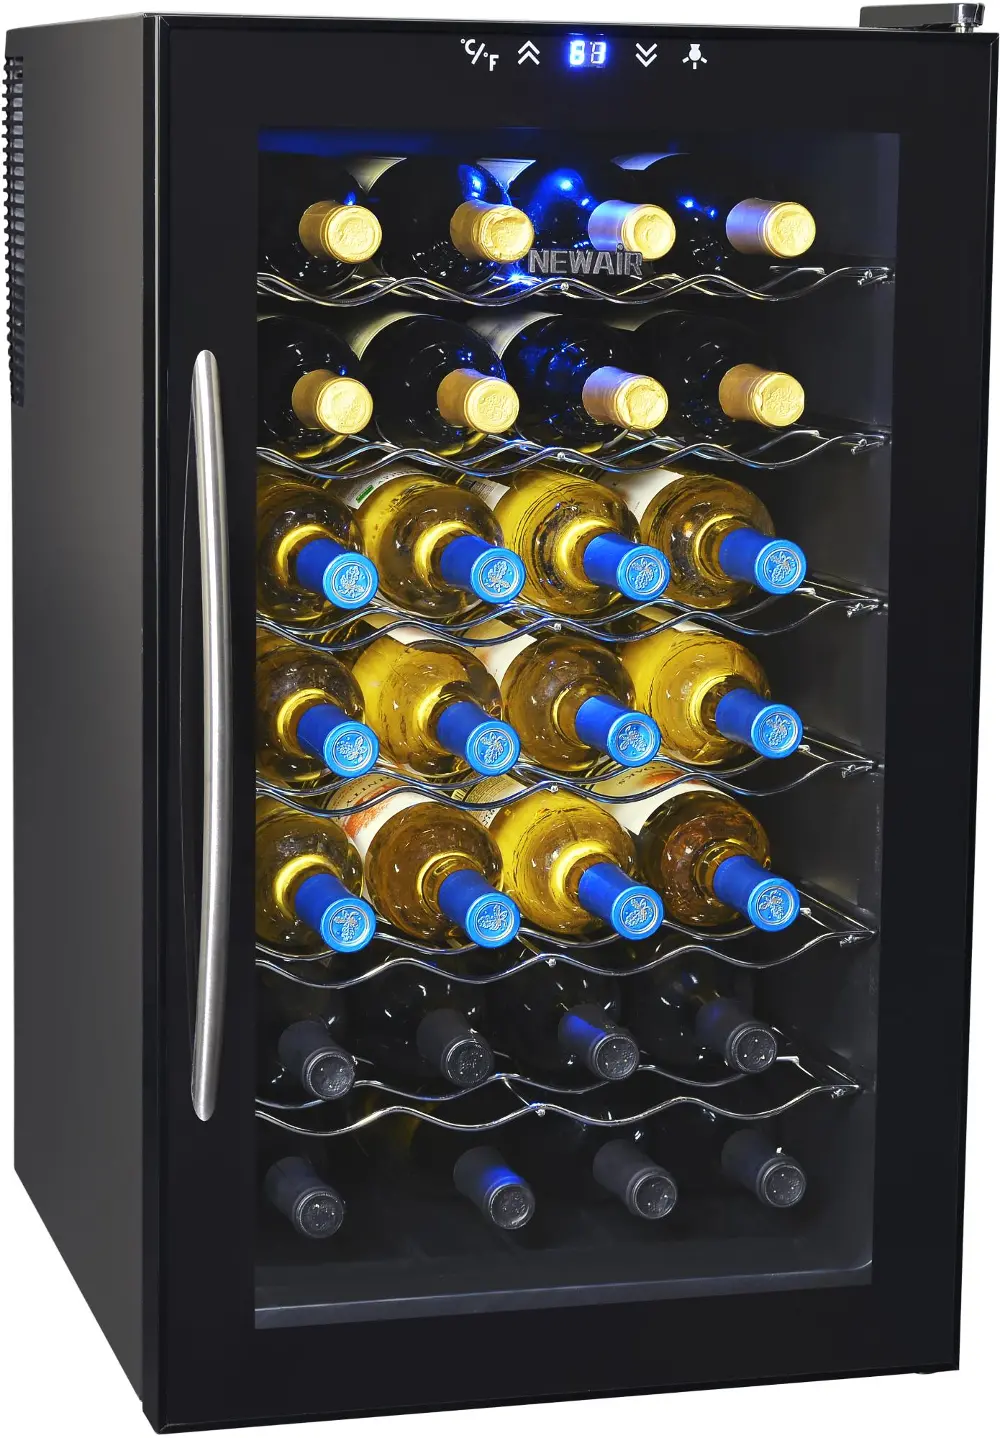 AW-280E AW-280E Thermoelectric Wine Cooler-1